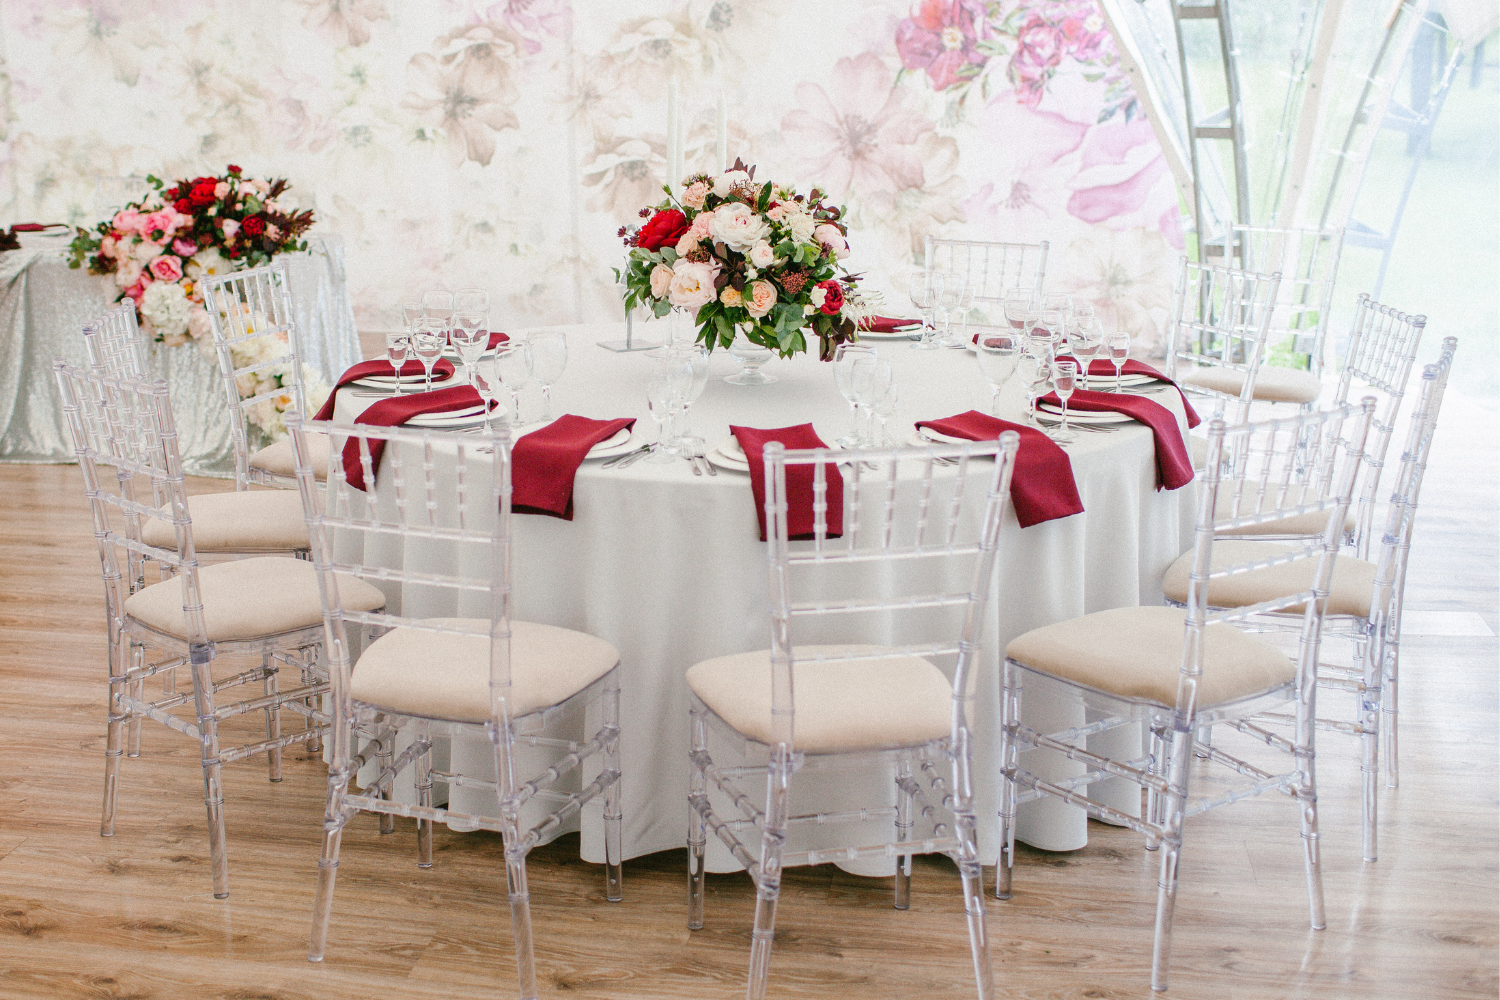 Table Linen Guide: How to Pick the Right Table Linen for Your Event | Balsa Circle